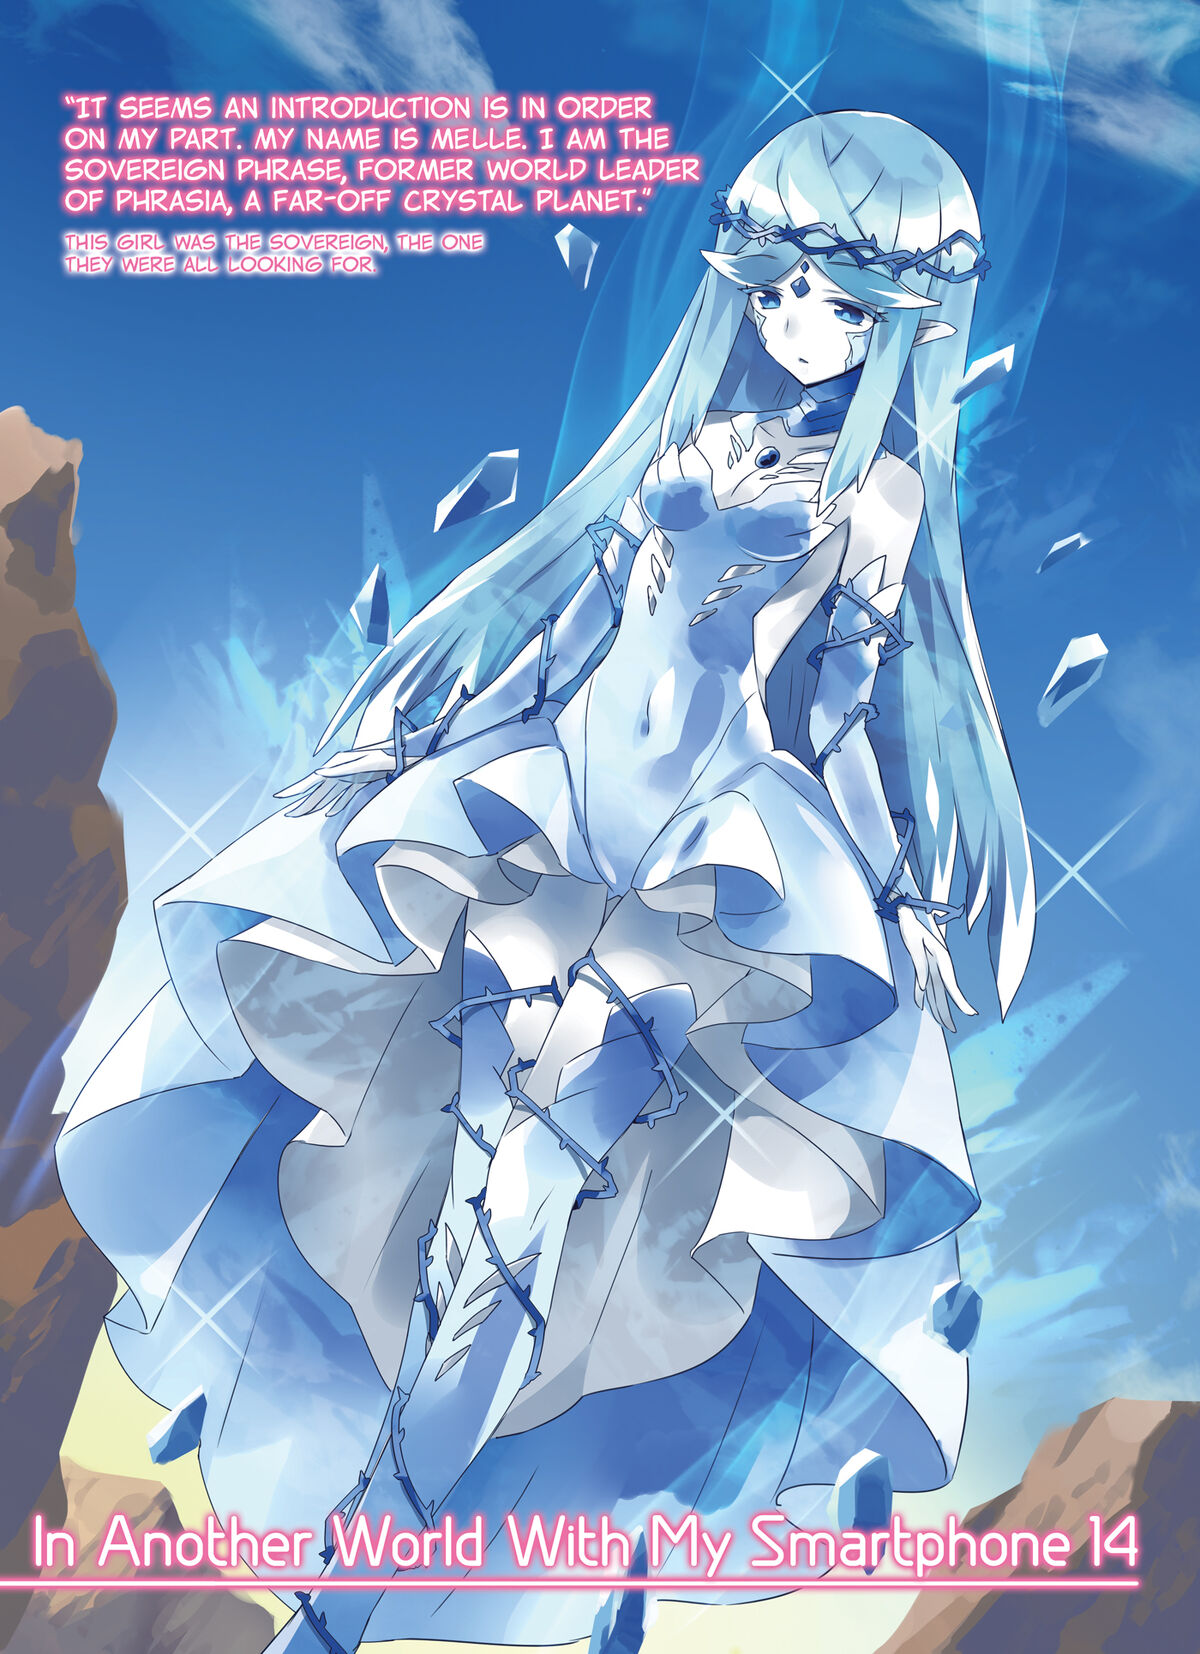 Light Novel Volume 3/Illustrations, In Another World With My Smartphone  Wiki